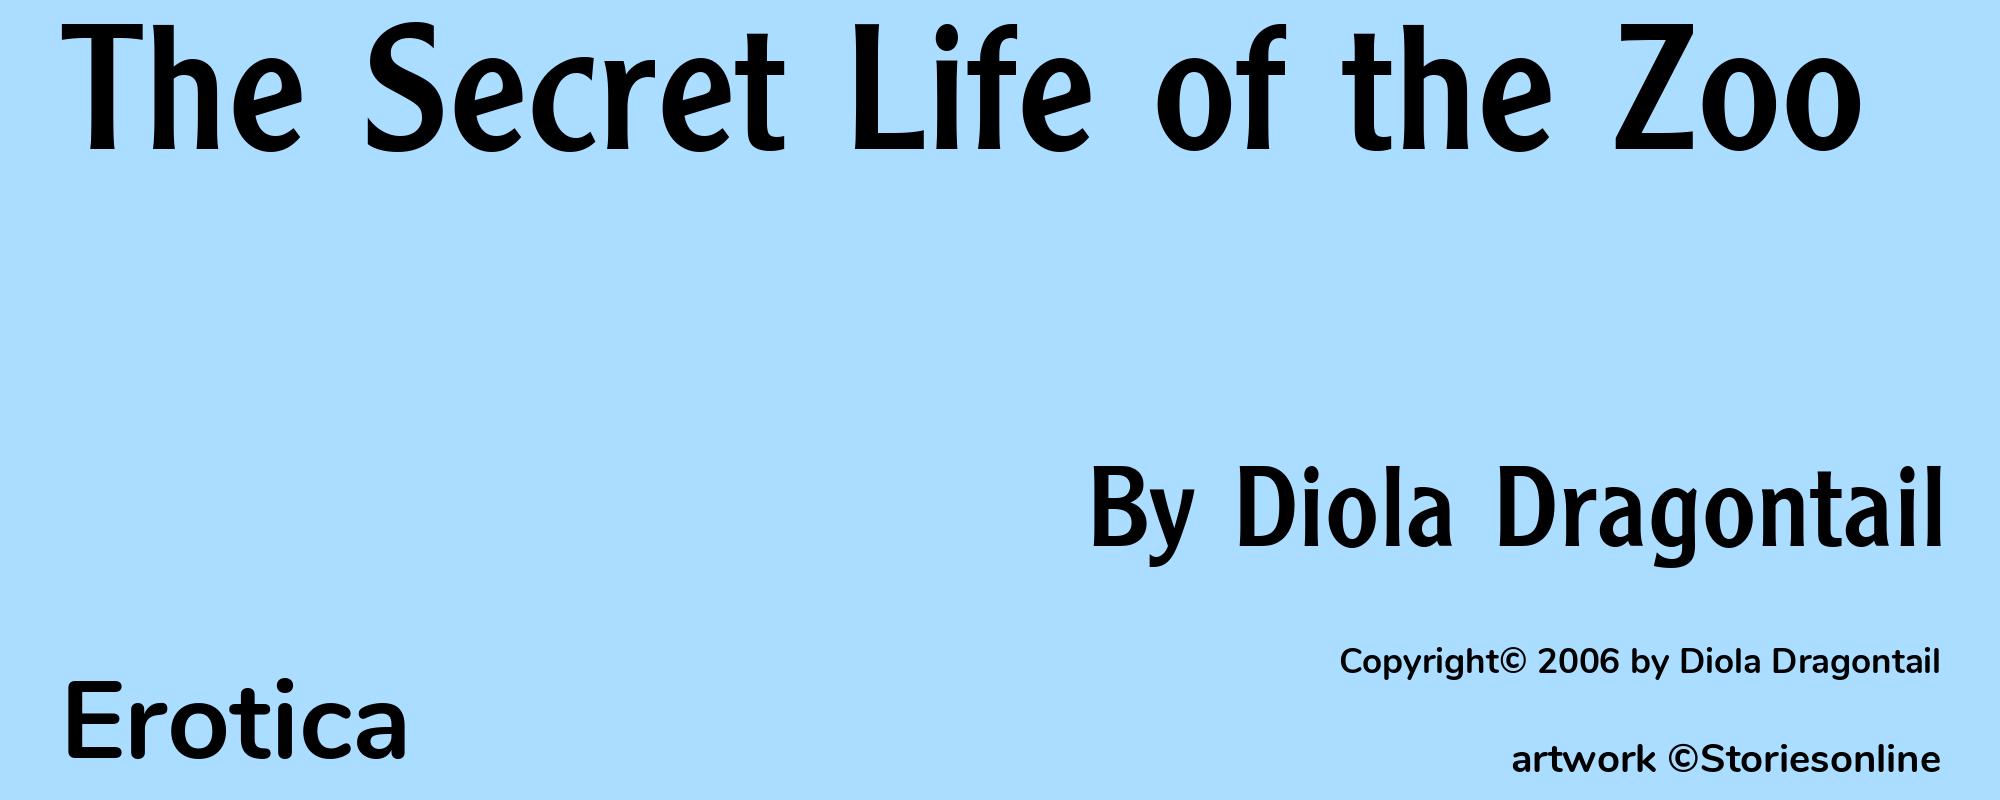 The Secret Life of the Zoo - Cover